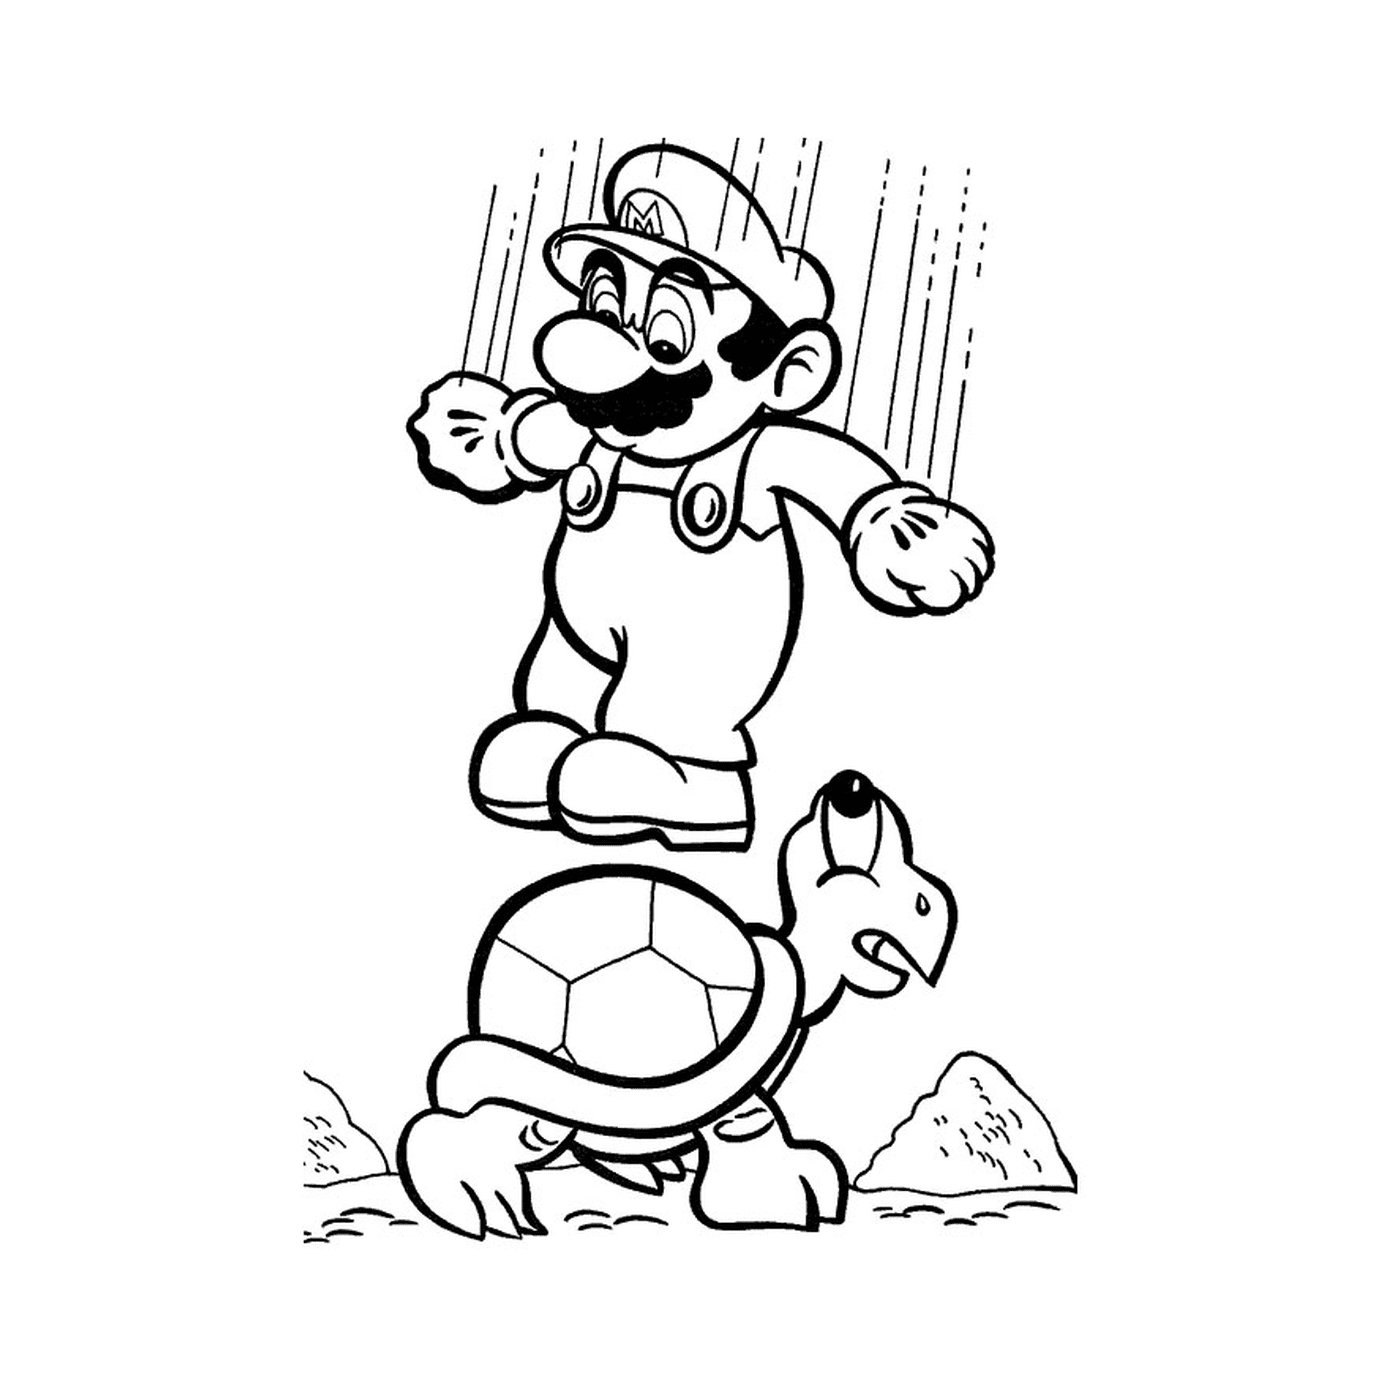  Mario and a turtle 